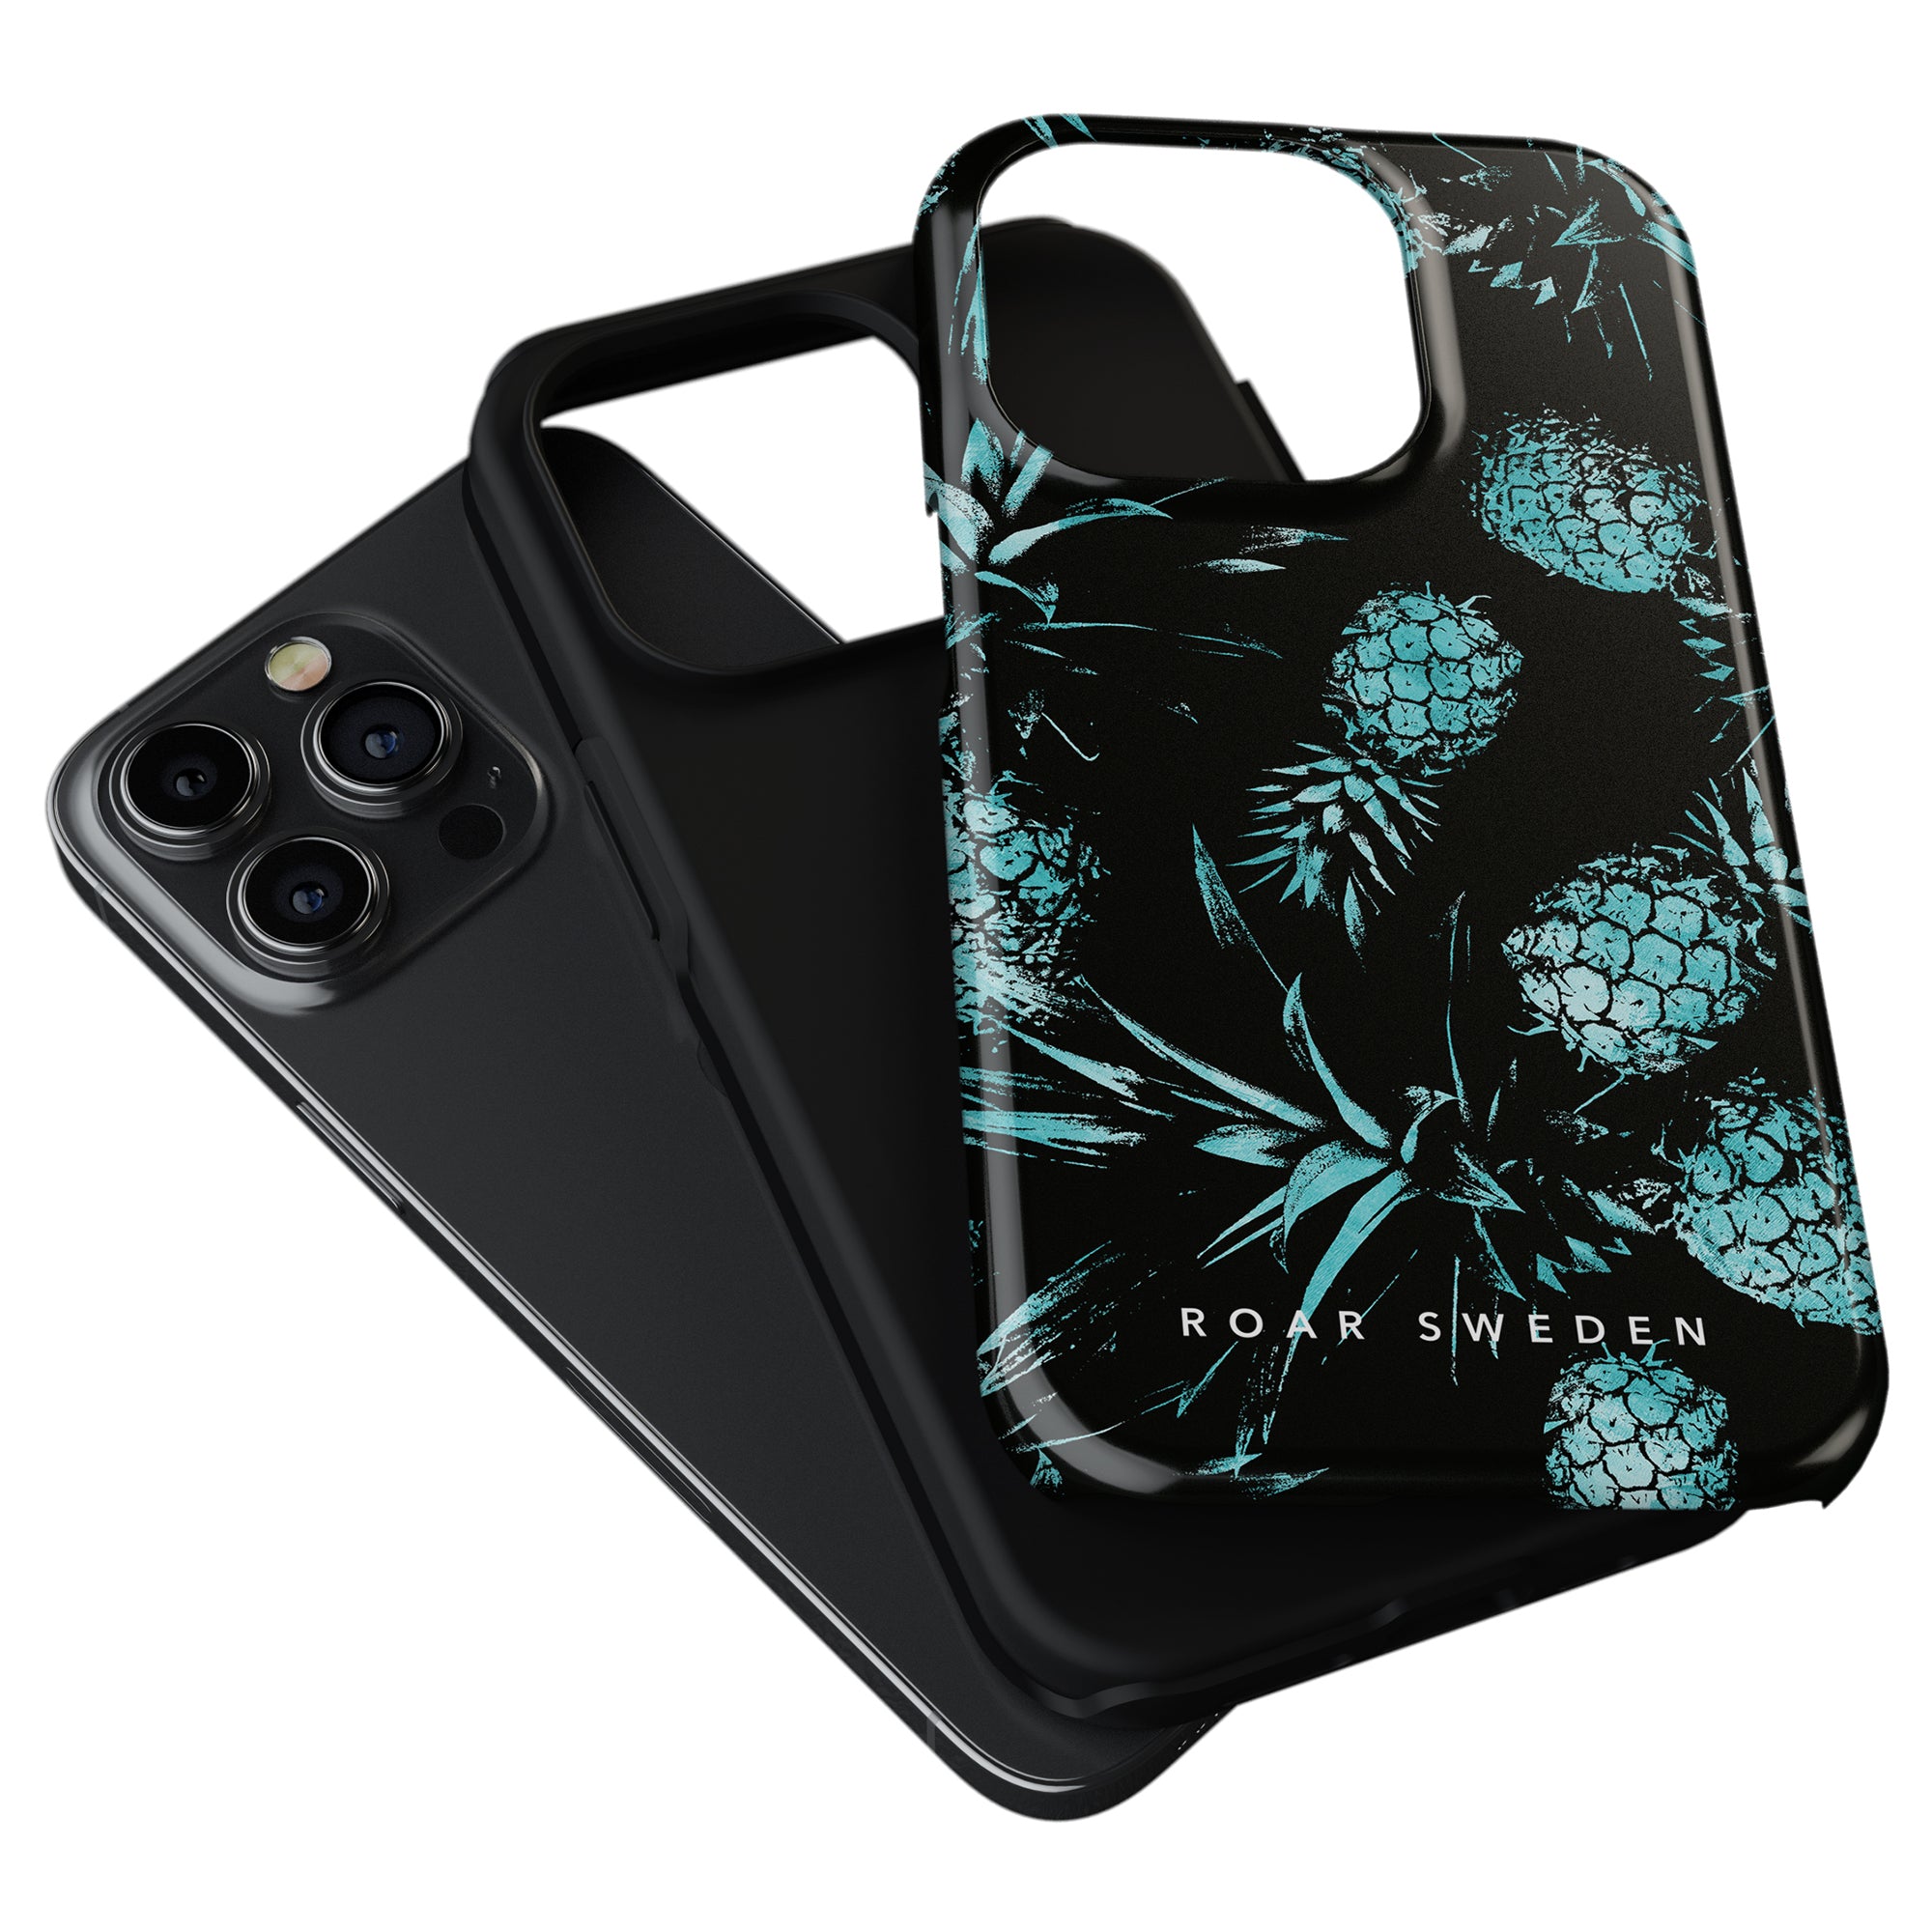 Two stylish Turquoise Pineapples - Tough Case are shown, one plain black and the other black with a vibrant green pineapple pattern from the Exotic Collection, and featuring "ROAR SWEDEN" text.